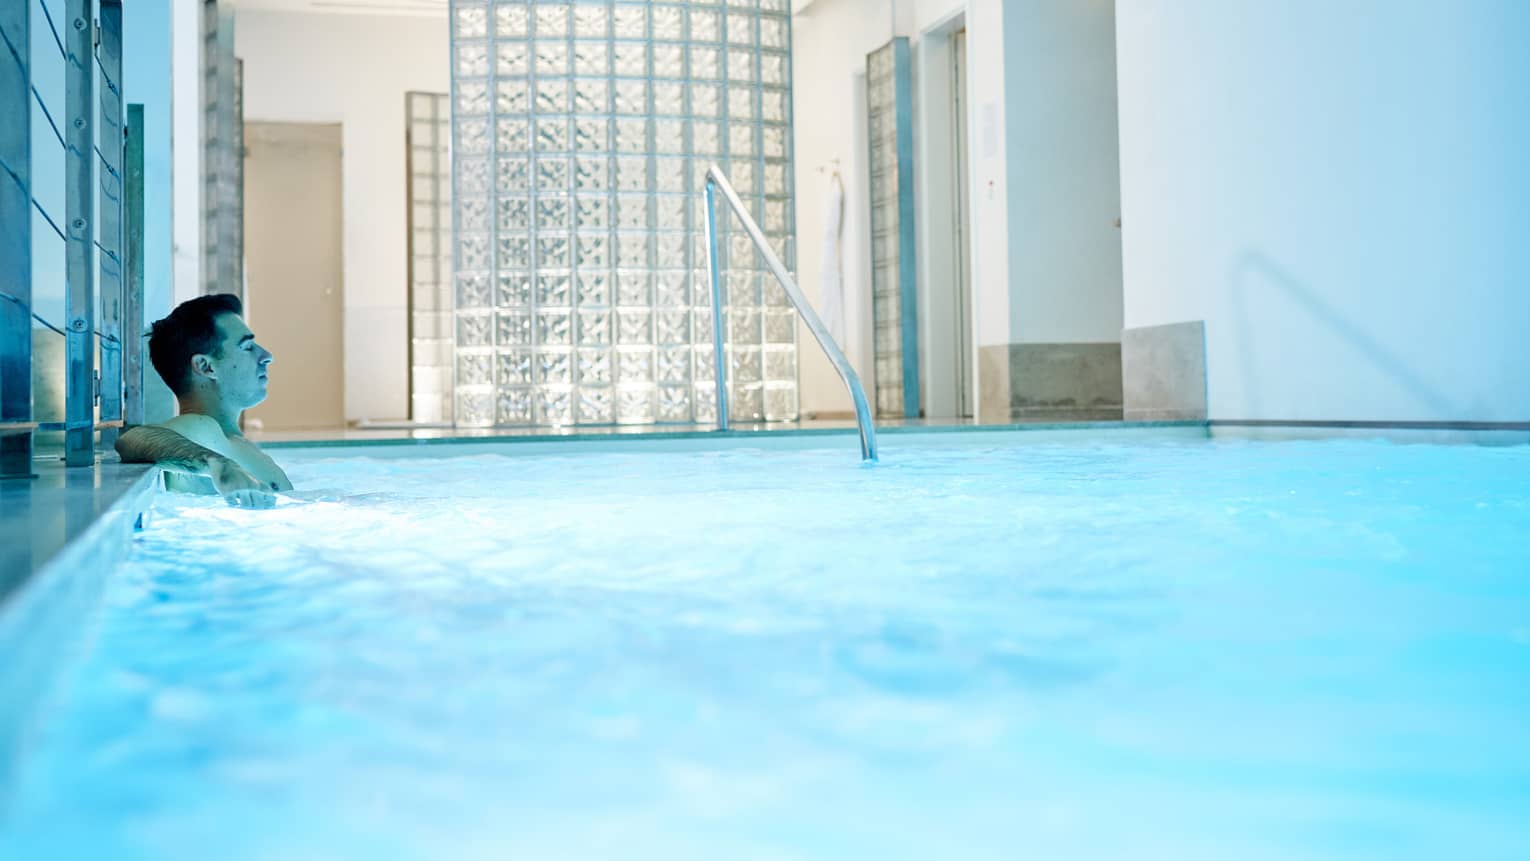 Man leans back in indoor pool with blue illuminated water